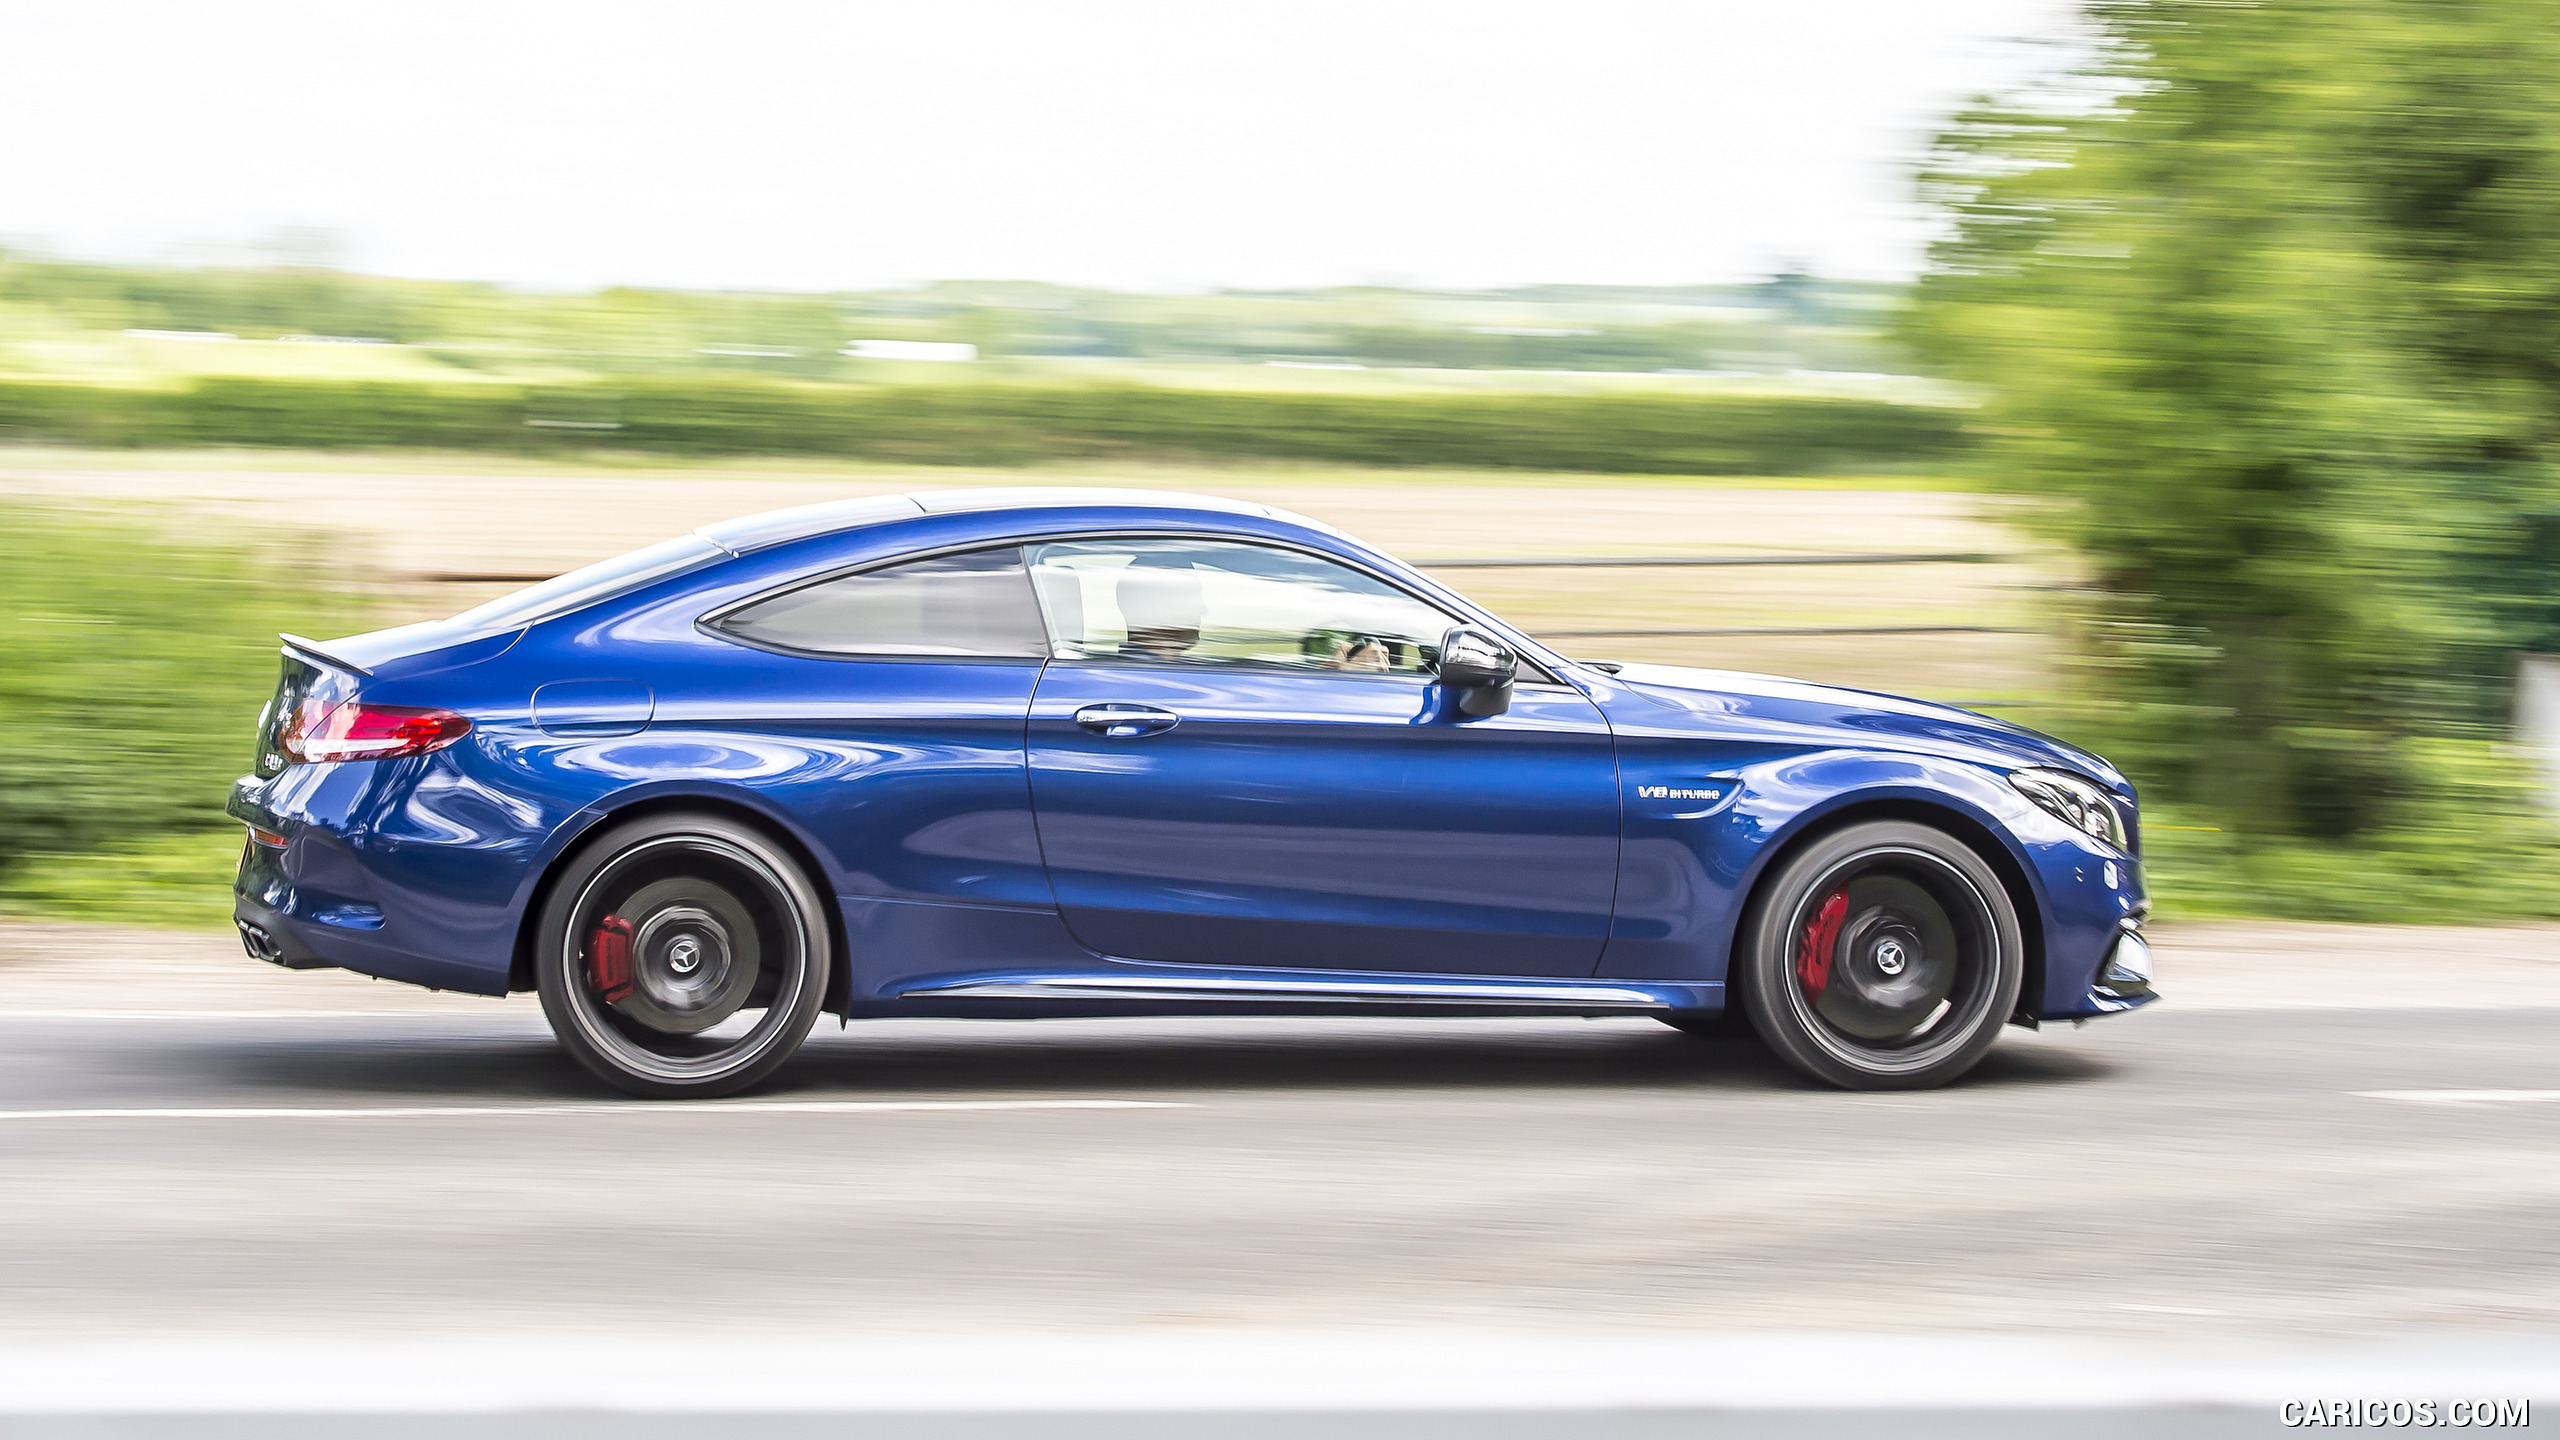 2017 Mercedes-AMG C63 S Coupe (UK-Spec) - Side, #12 of 52